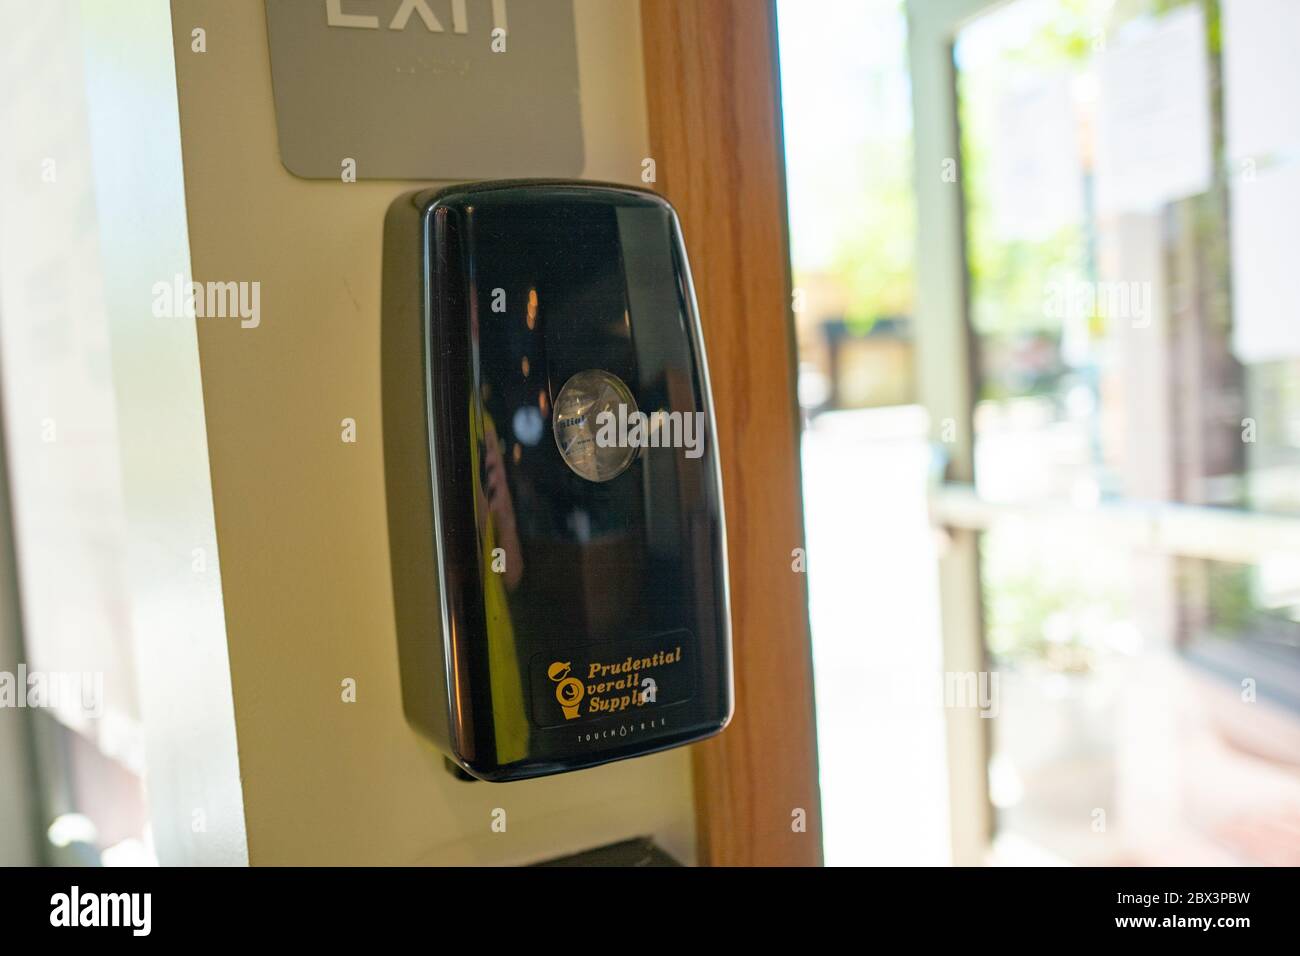 A hand sanitizer station is visible at the entrance to a restaurant in the Silicon Valley, Mountain View, California during an outbreak of the COVID-19 coronavirus, April 24, 2020. () Stock Photo